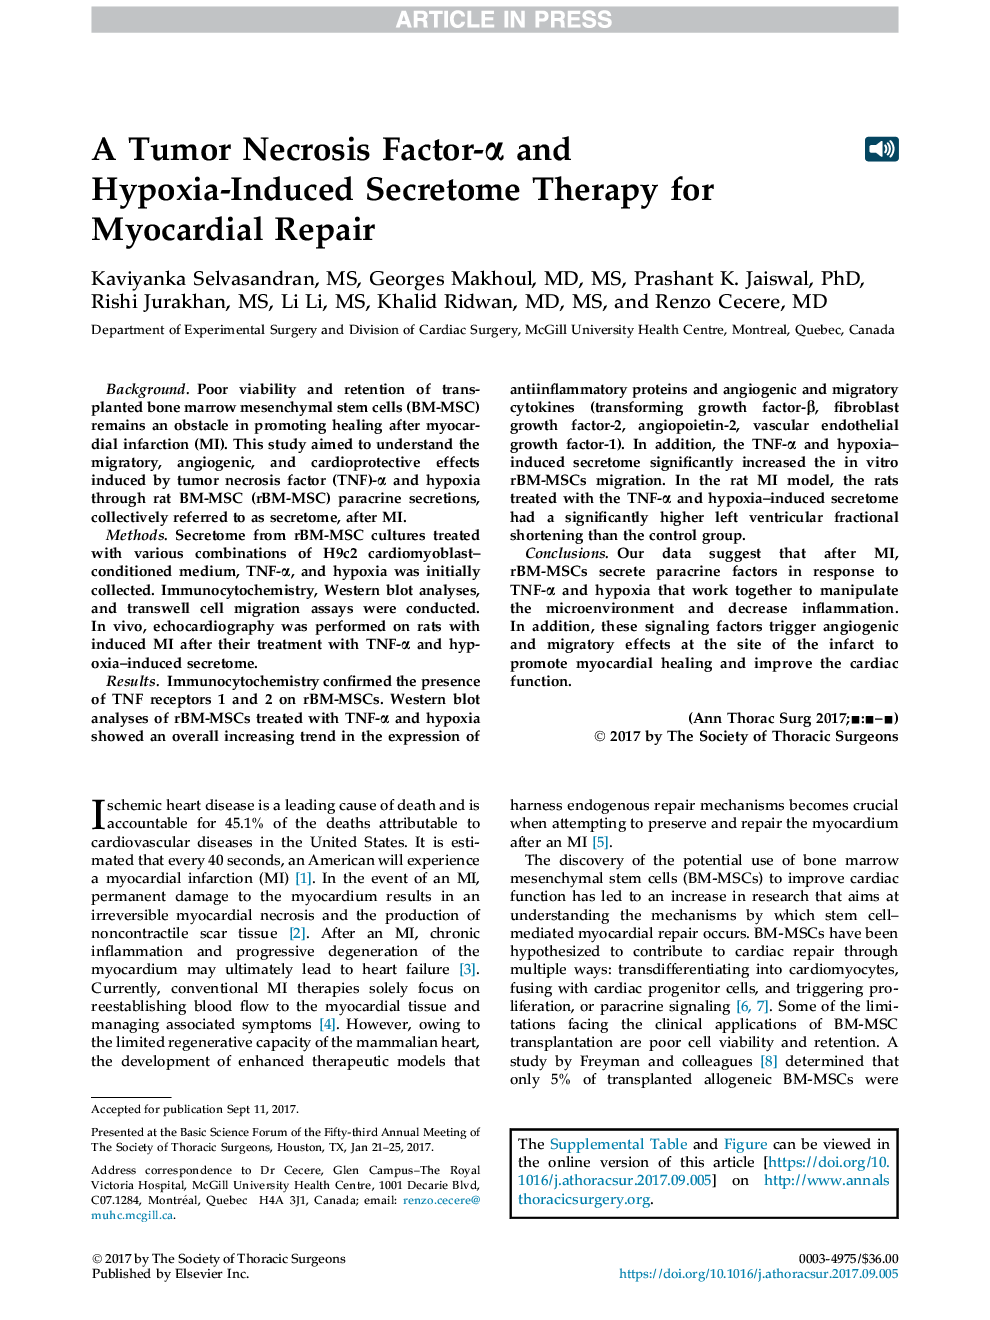 A Tumor Necrosis Factor-Î± and Hypoxia-Induced Secretome Therapy for Myocardial Repair